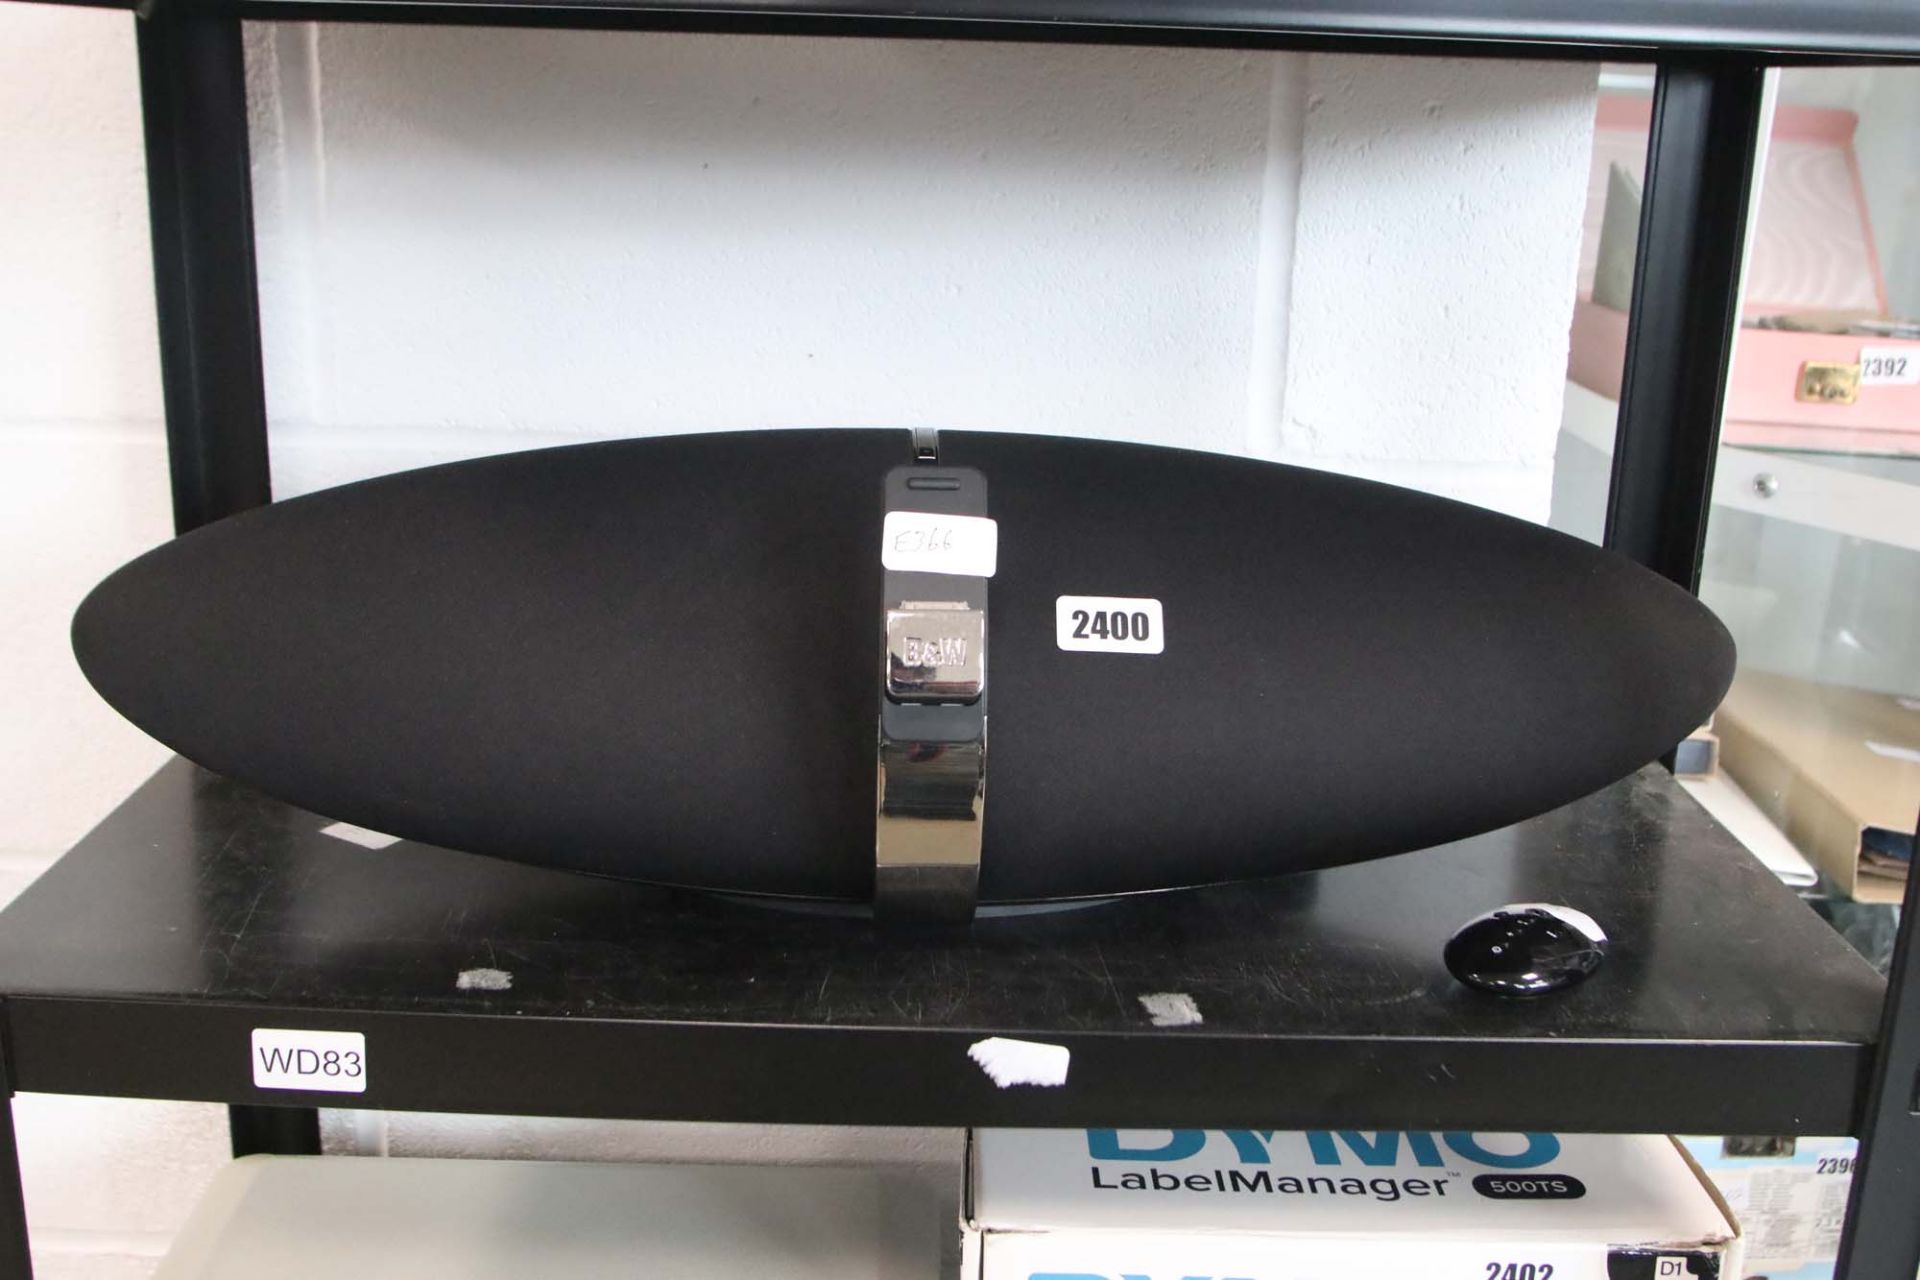 Bowers & Wilkins Zeppelin speaker with remote control and iPod dock